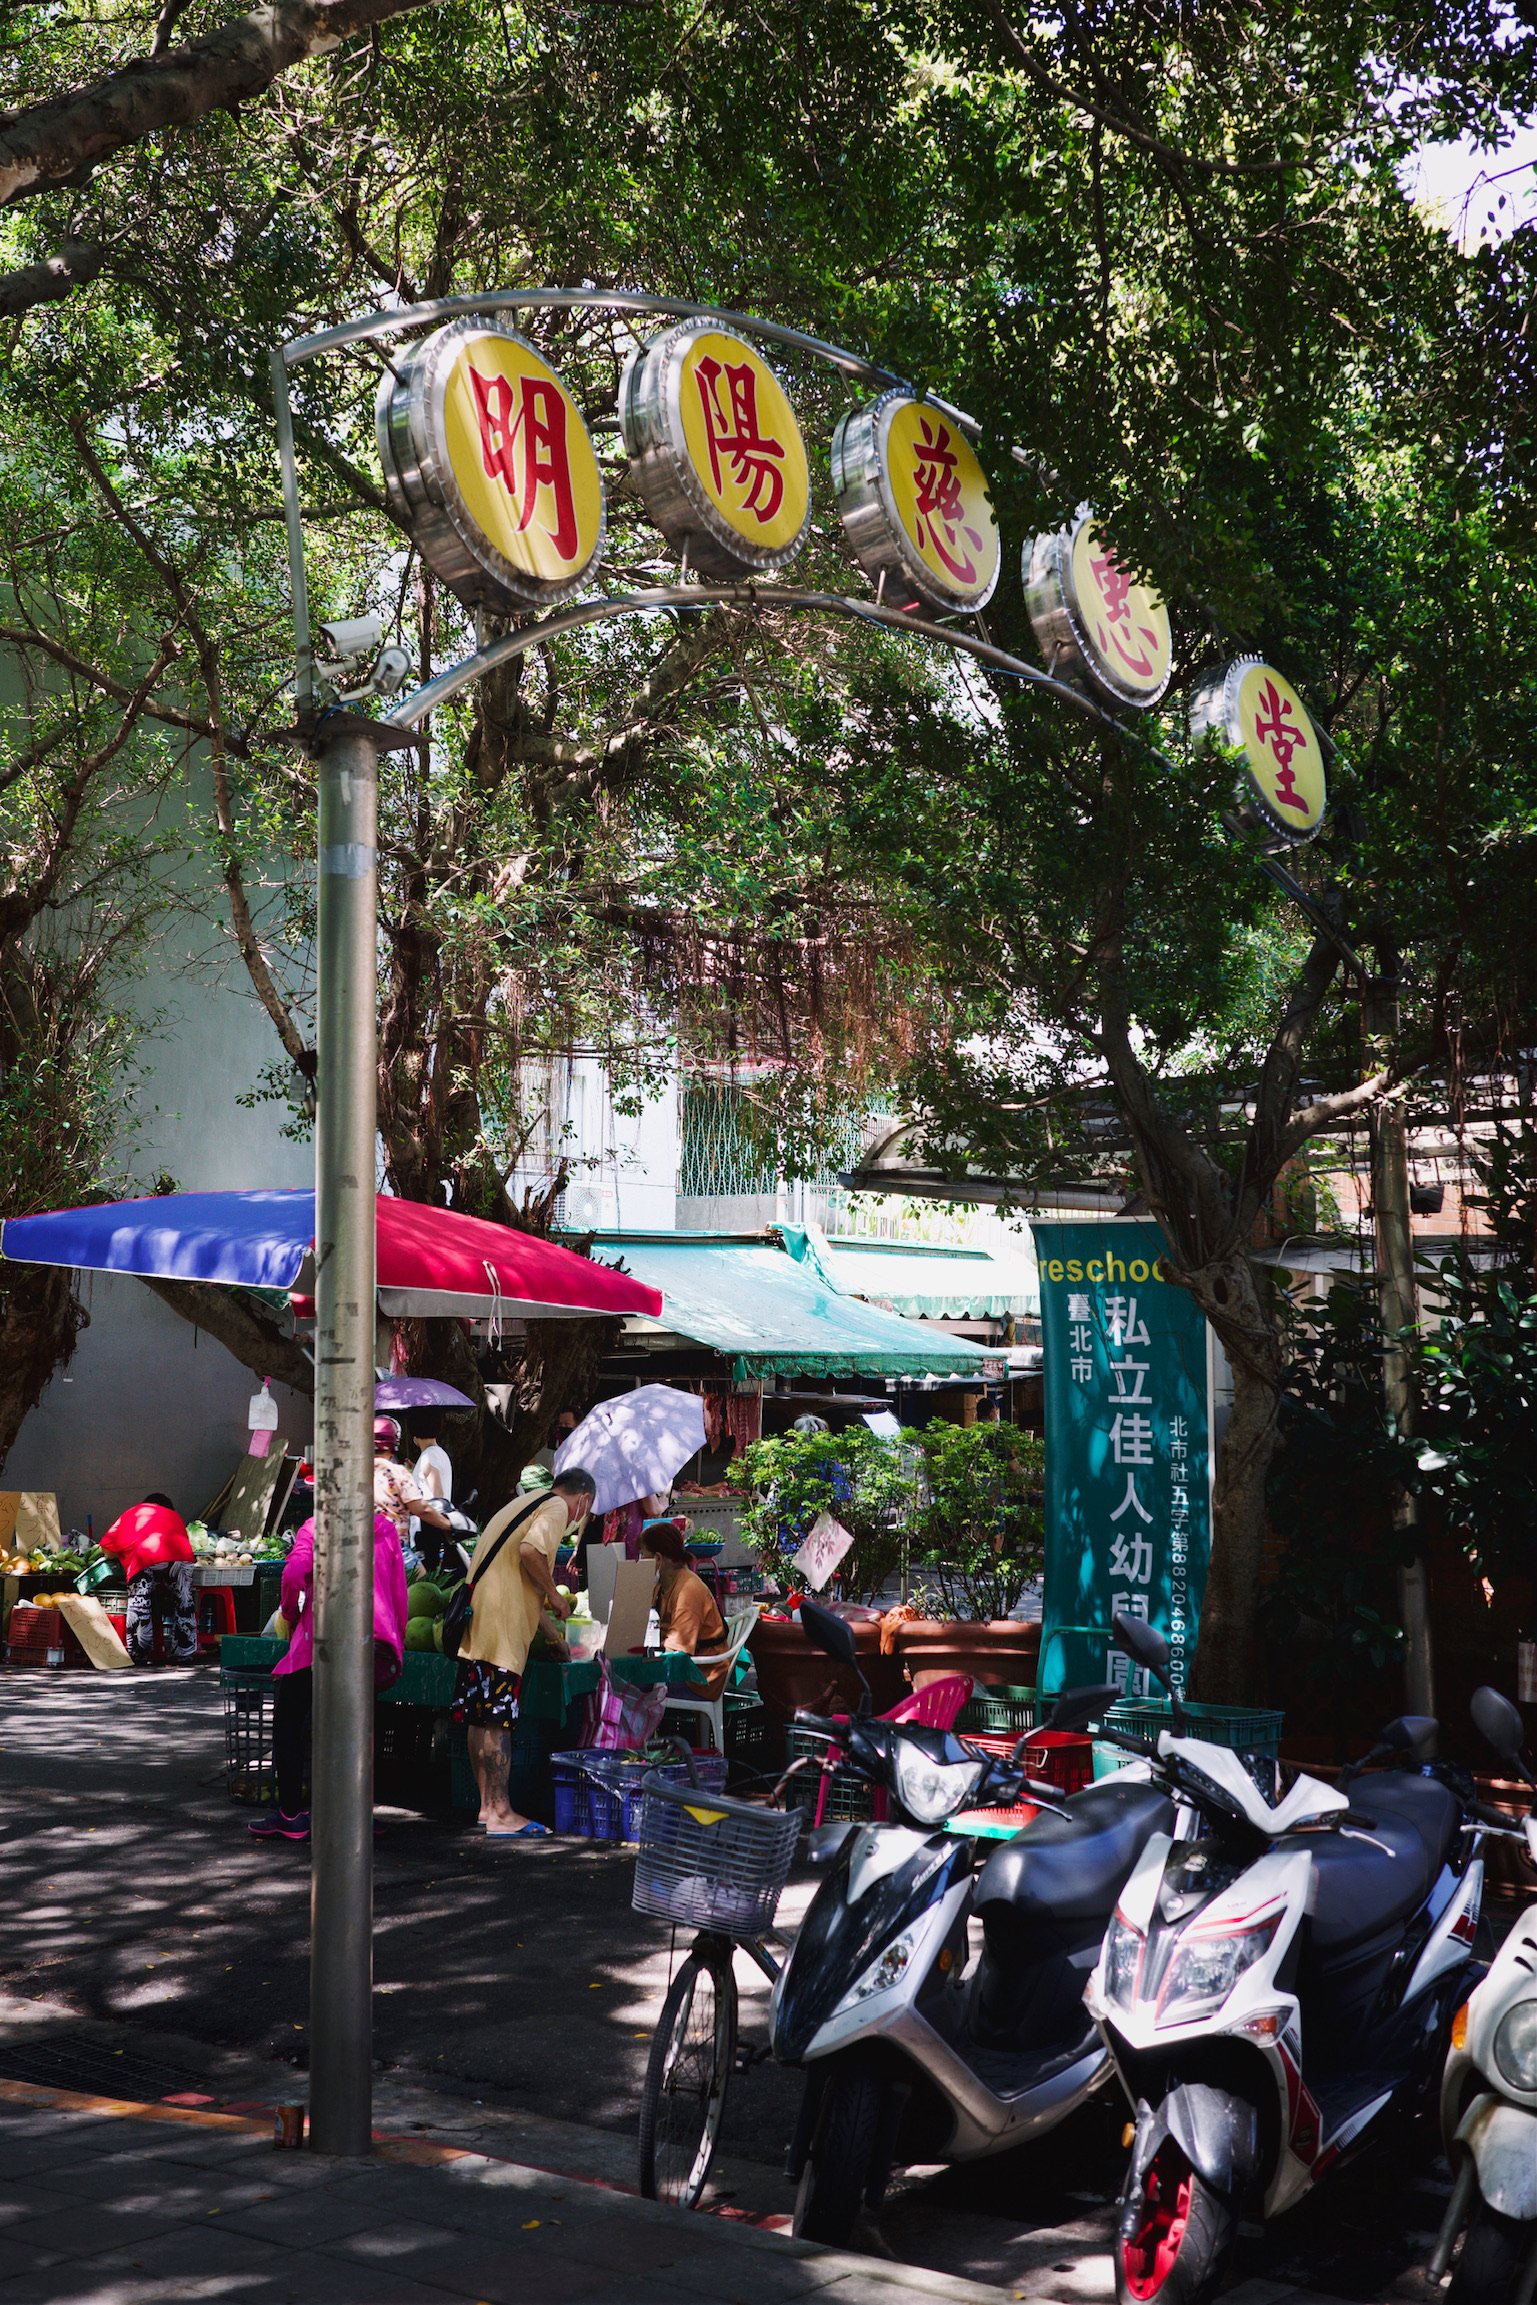 Sunny day. Entrance to a traditional market in Taipei, with street vendors, greeneries, and a arch named after a temple.